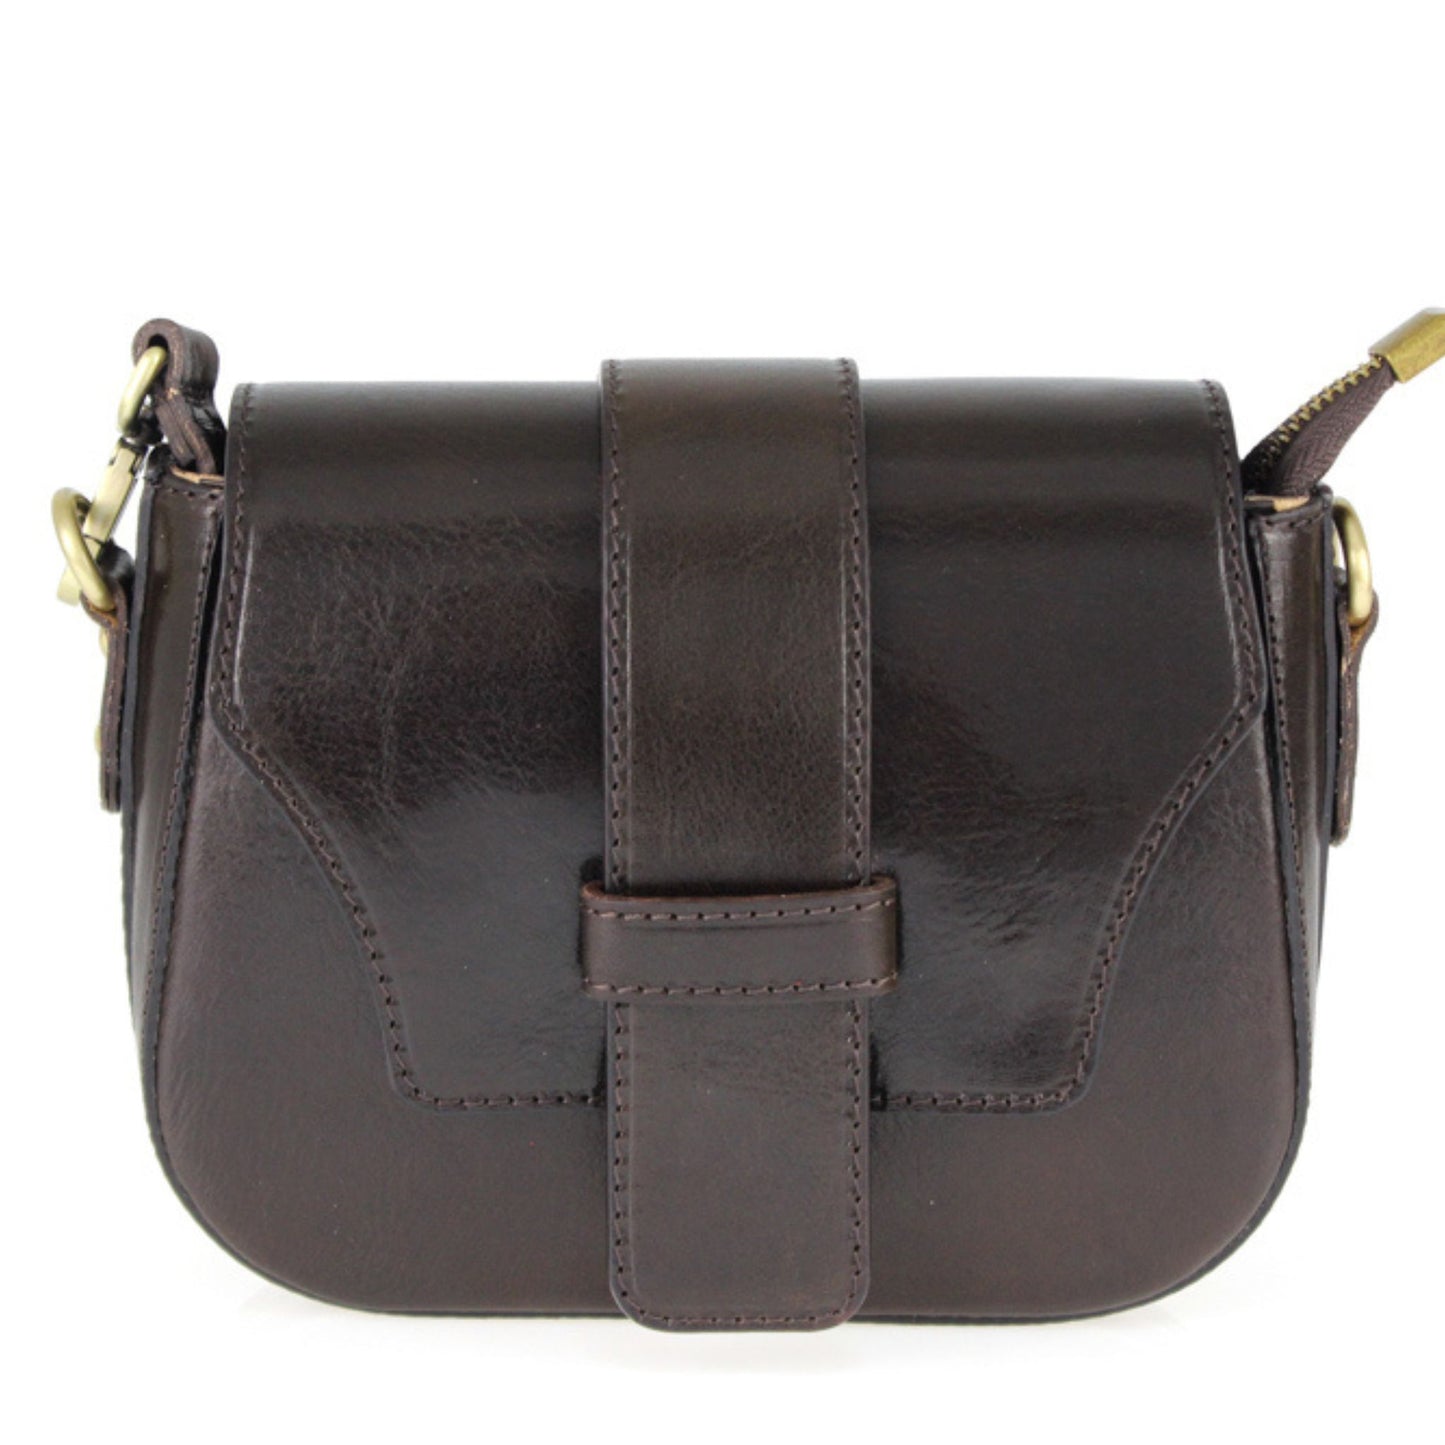 The Leather Box Bag